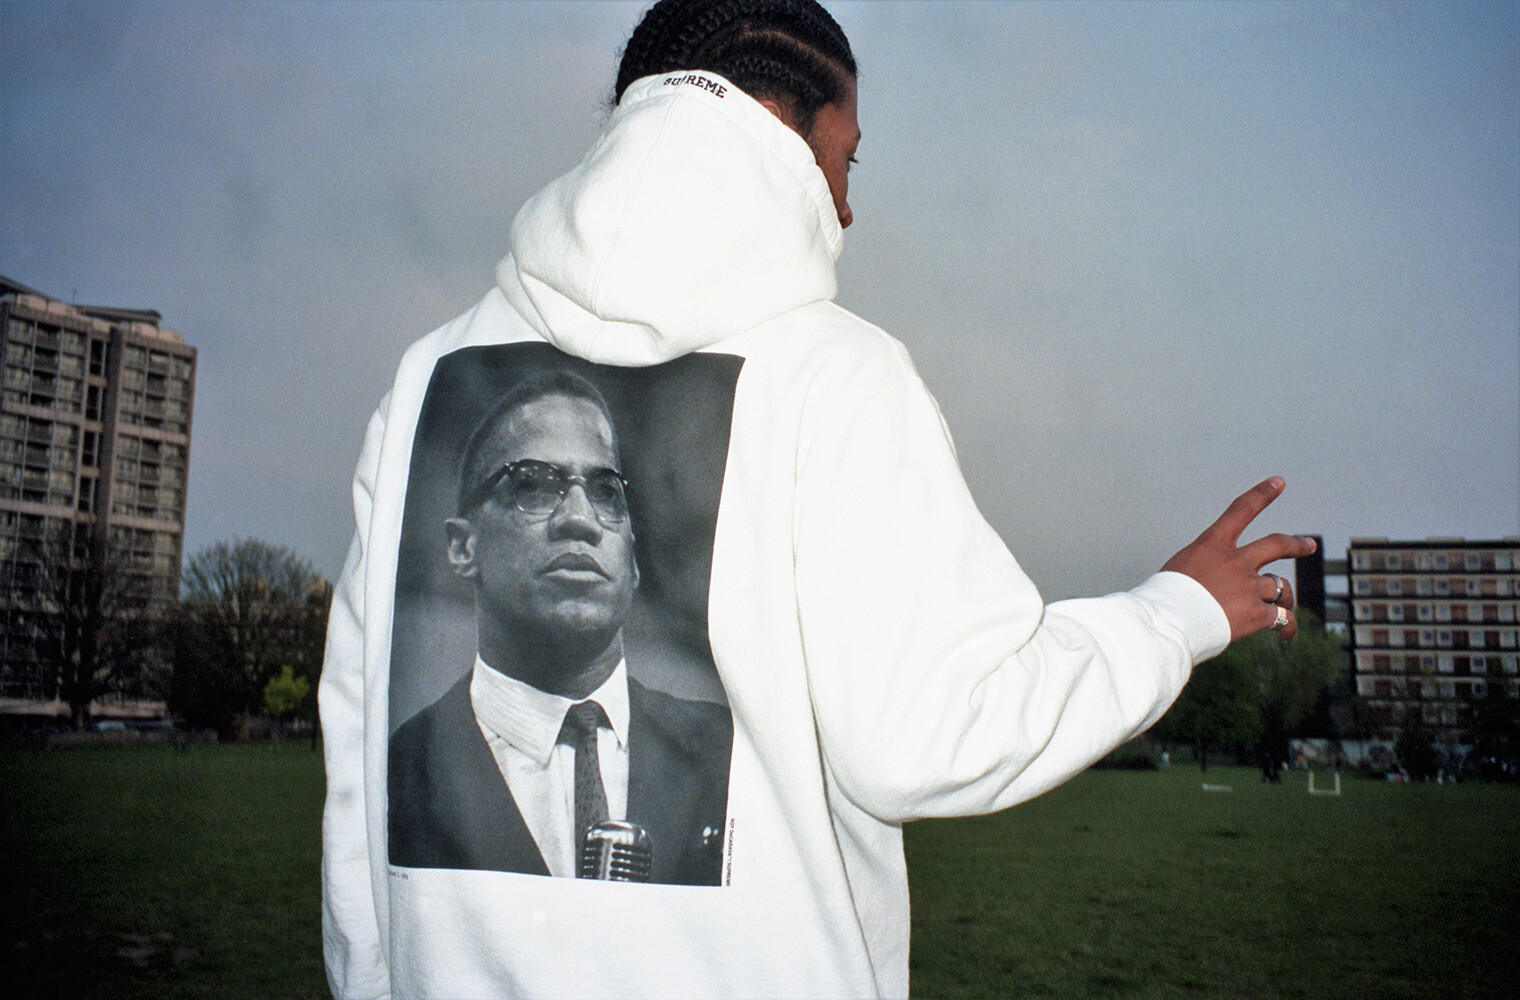 A photograph of a hoodie by Supreme being worn by a model, featuring a photograph of Malcolm X by Roy DeCarava.